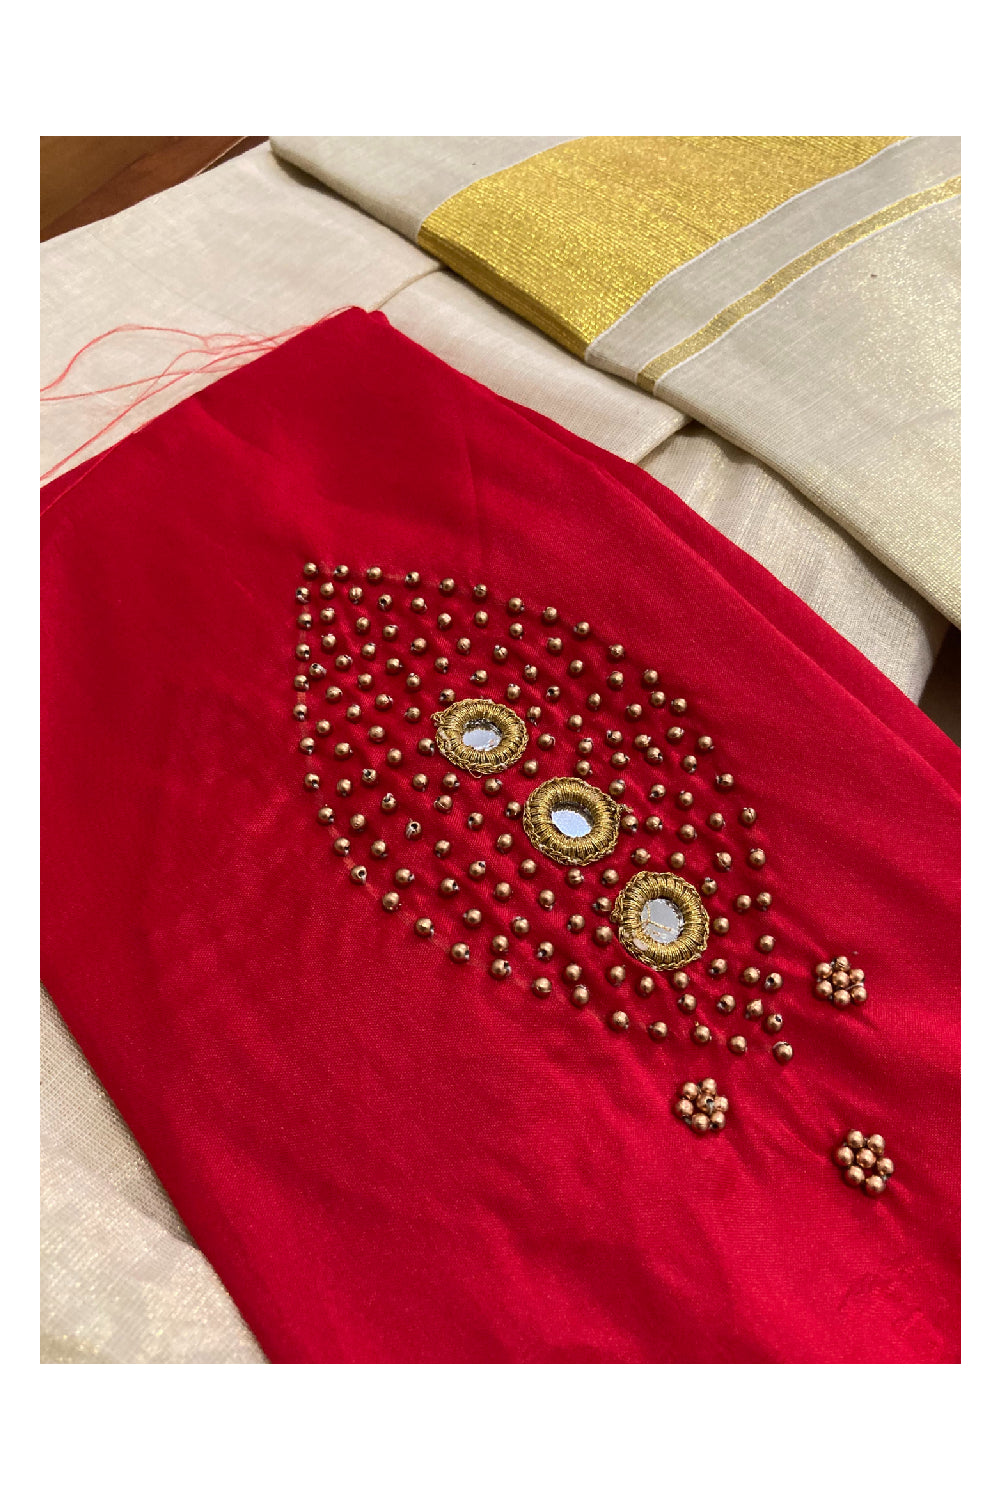 Kerala Tissue Stitched Dhavani Set with Blouse Piece and Neriyathu in with Red Accents